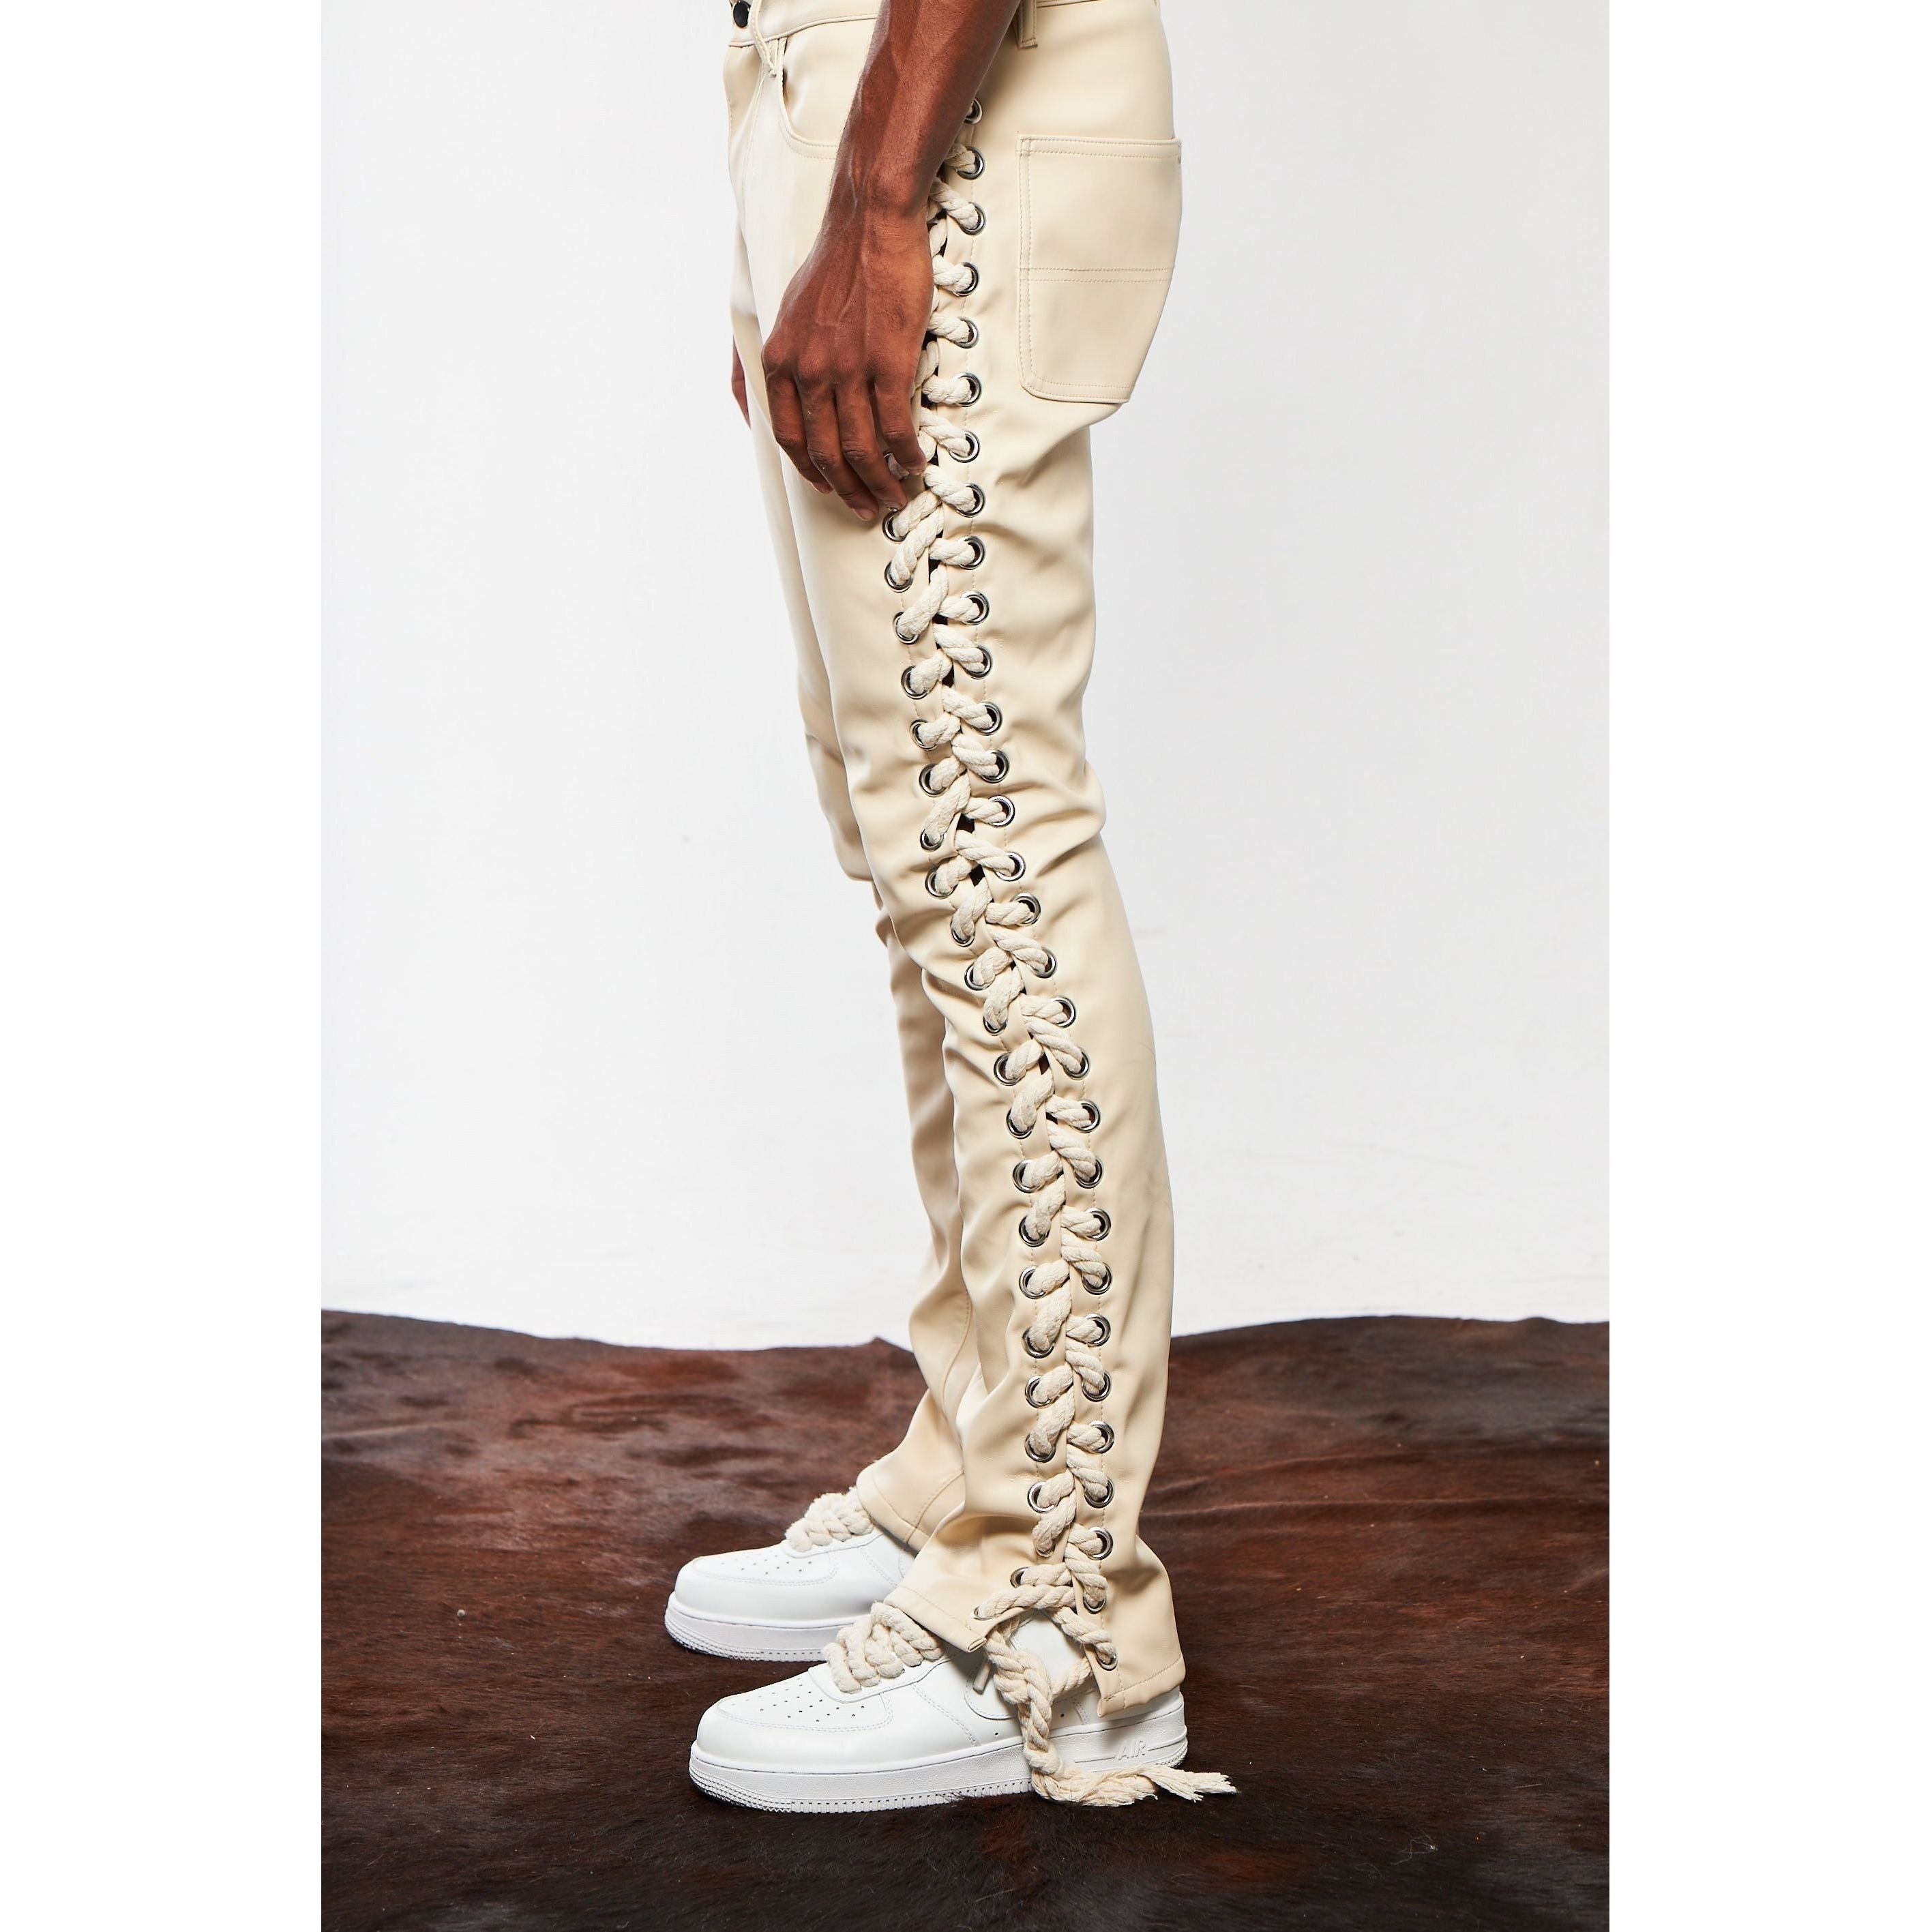 Rope Leather Pants (Beige)